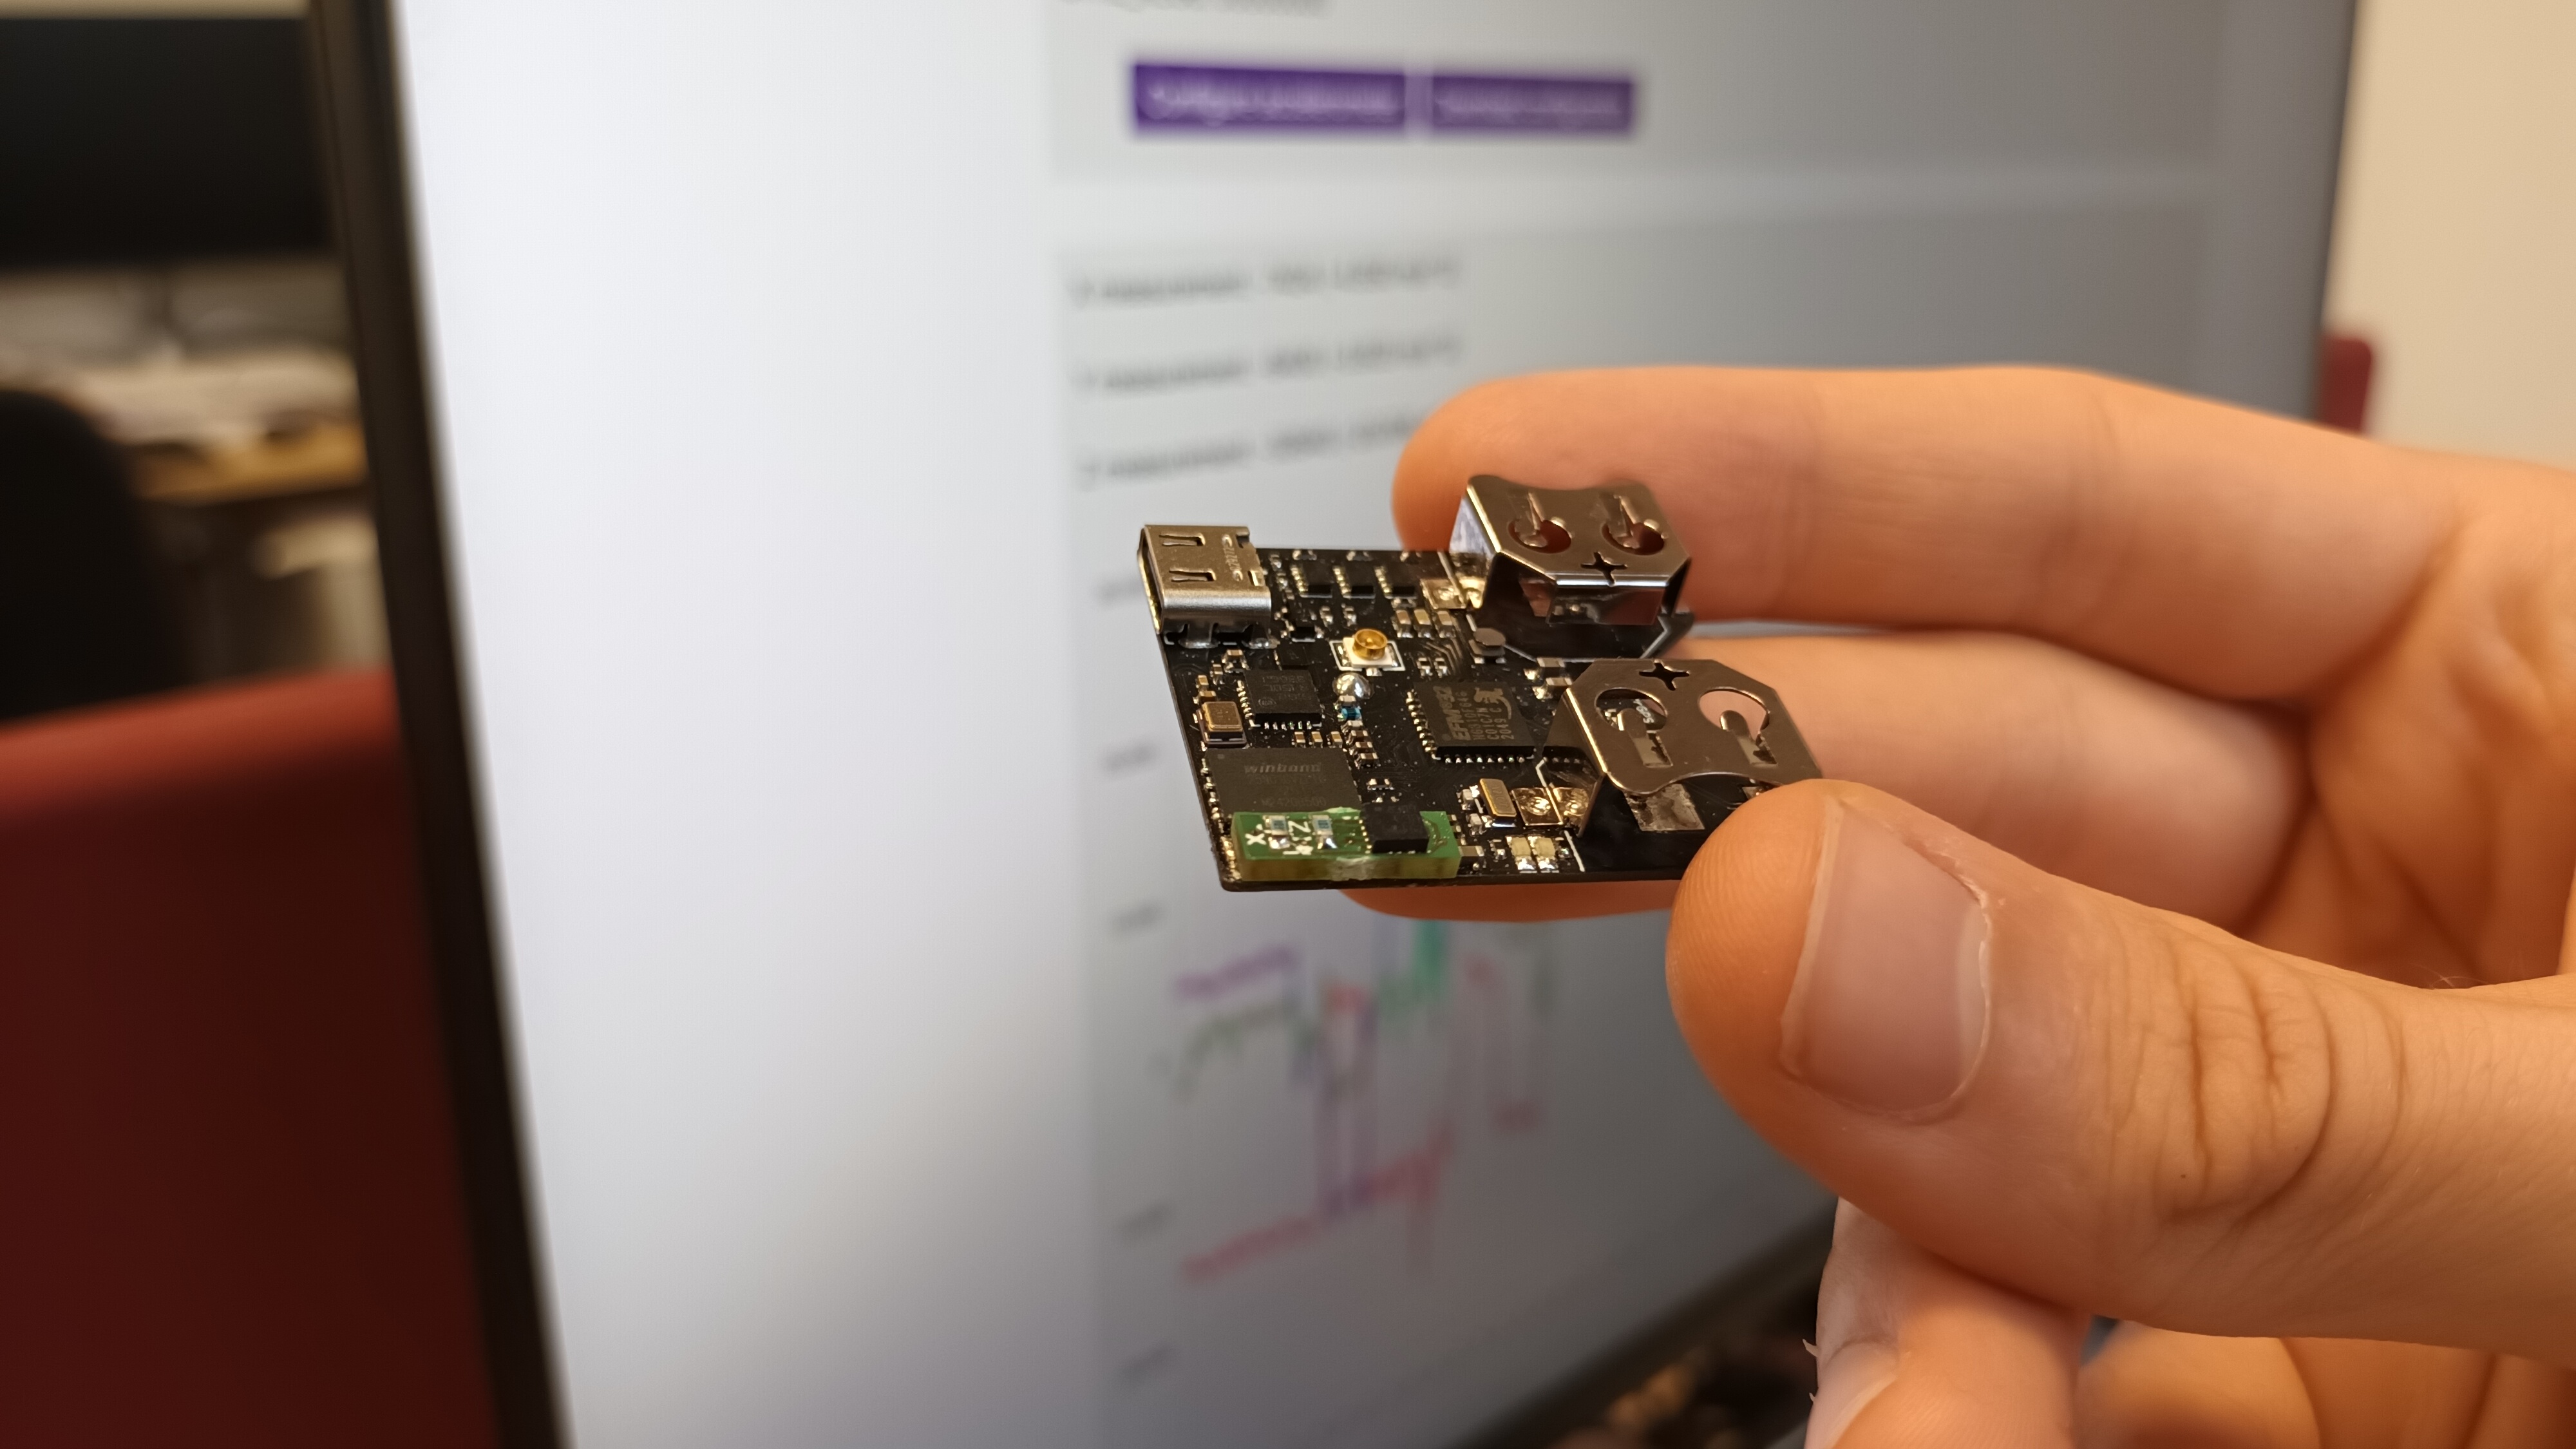 SnapperGPS with accelerometer daughterboard